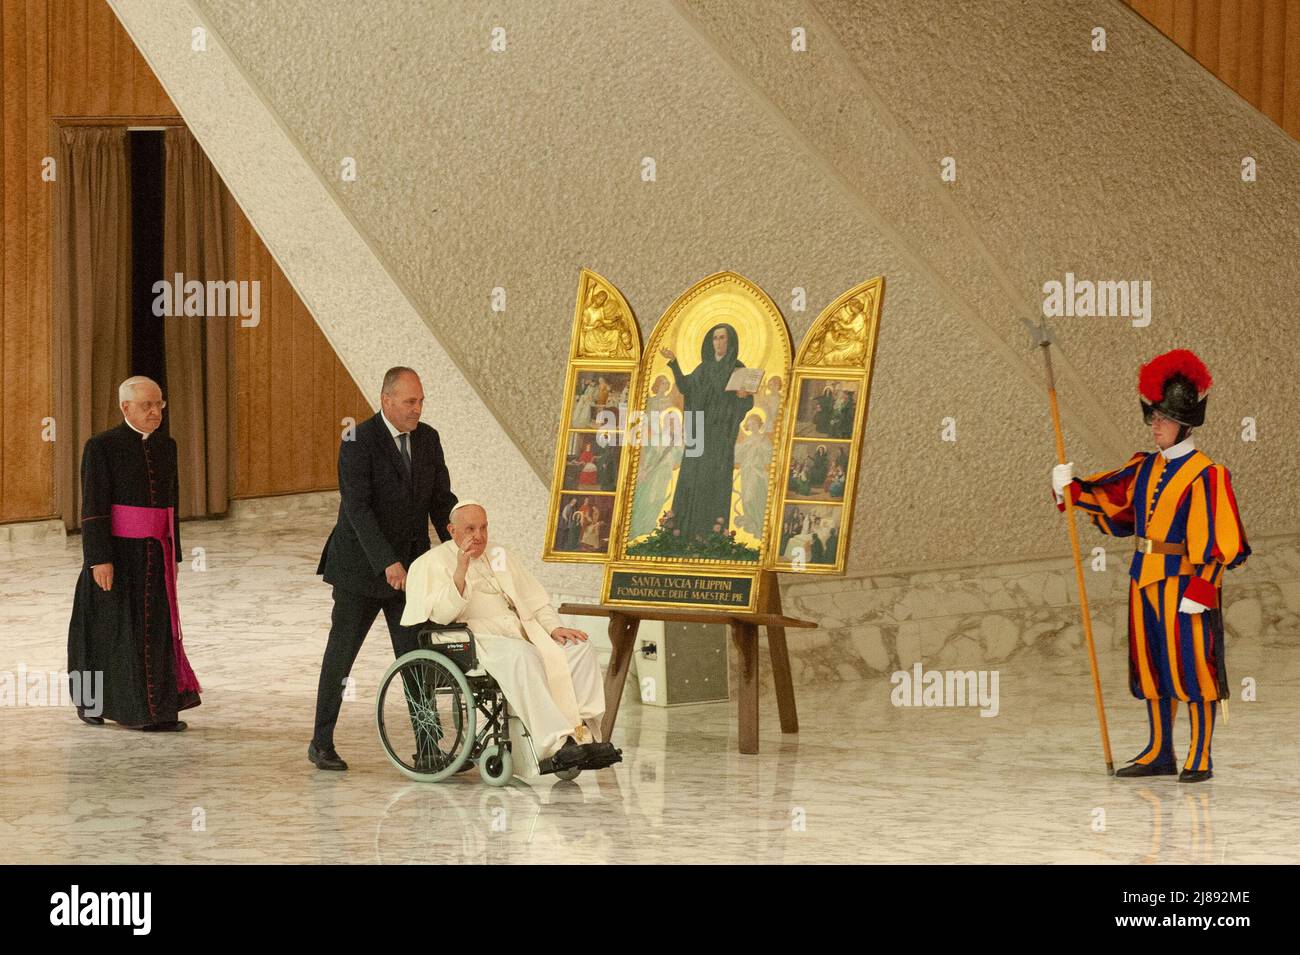 Italy, Rome, Vatican, 22/05/14. Pope Francis, arrives in a wheelchair pushed by his butler Pierluigi Zanetti, to leads a special audience to pilgrims from the Istituto Maestre Pie Filippini and the Dioceses of Viterbo and Civitavecchia-Tarquinia, on the occasion of the 350th anniversary of the birth of St. Lucia Filippini, in the Paul VI Hall.Papa Francesco, in sedia a rotelle e spinto dal suo maggiordomo Pierluigi Zanetti, conduce un'udienza speciale ai pellegrini dell'Istituto Maestre Pie Filippini e delle Diocesi di Viterbo e Civitavecchia-Tarquinia, in occasione del 350° anniversario della Stock Photo